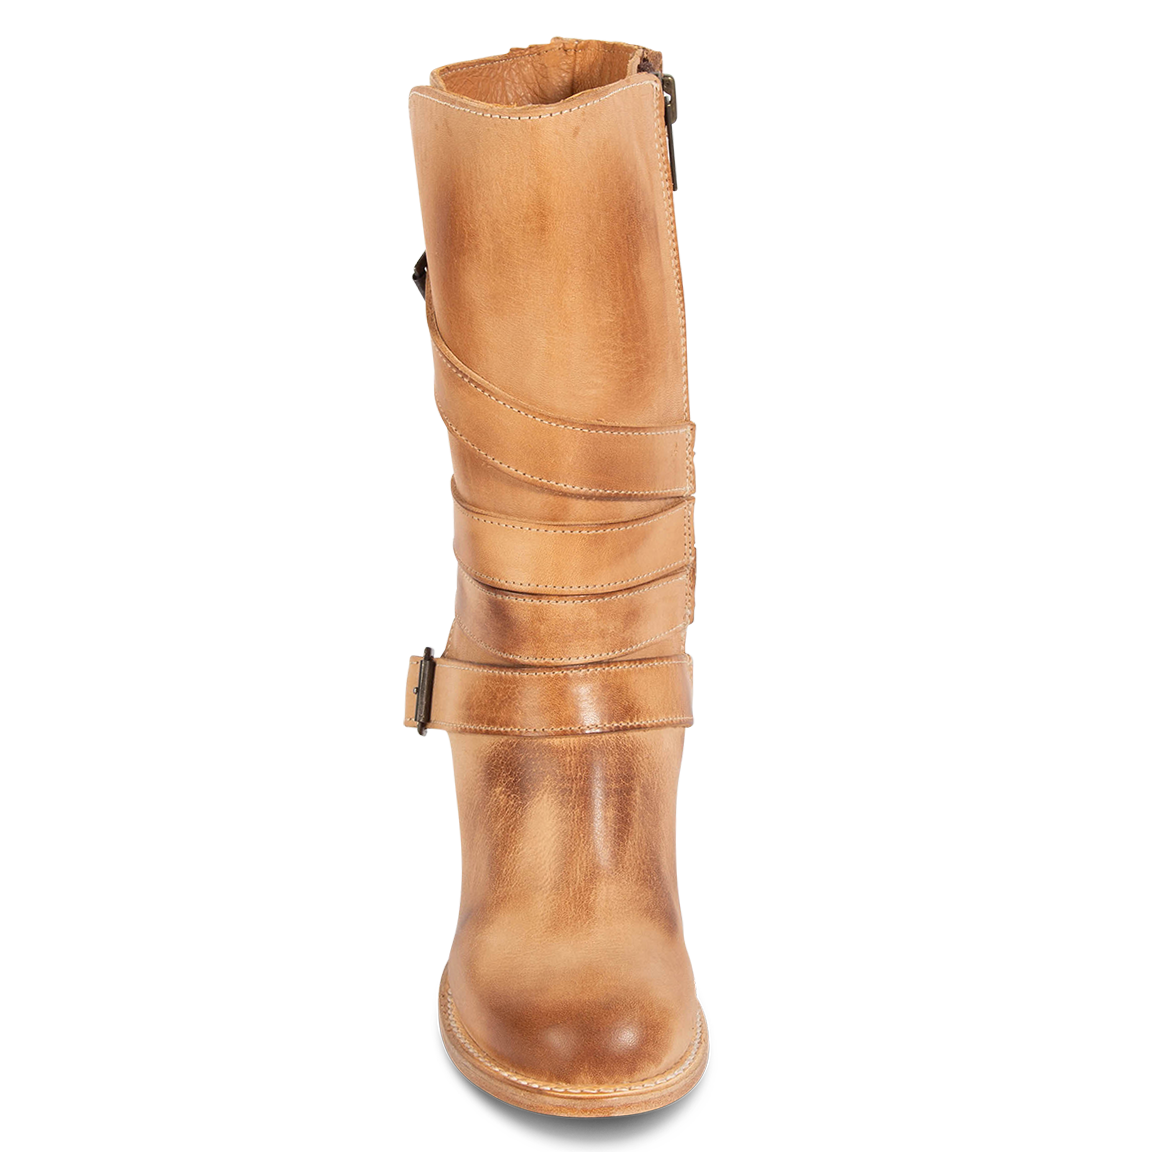 Front view showing leather straps on FREEBIRD women's Barker beige mid calf boot